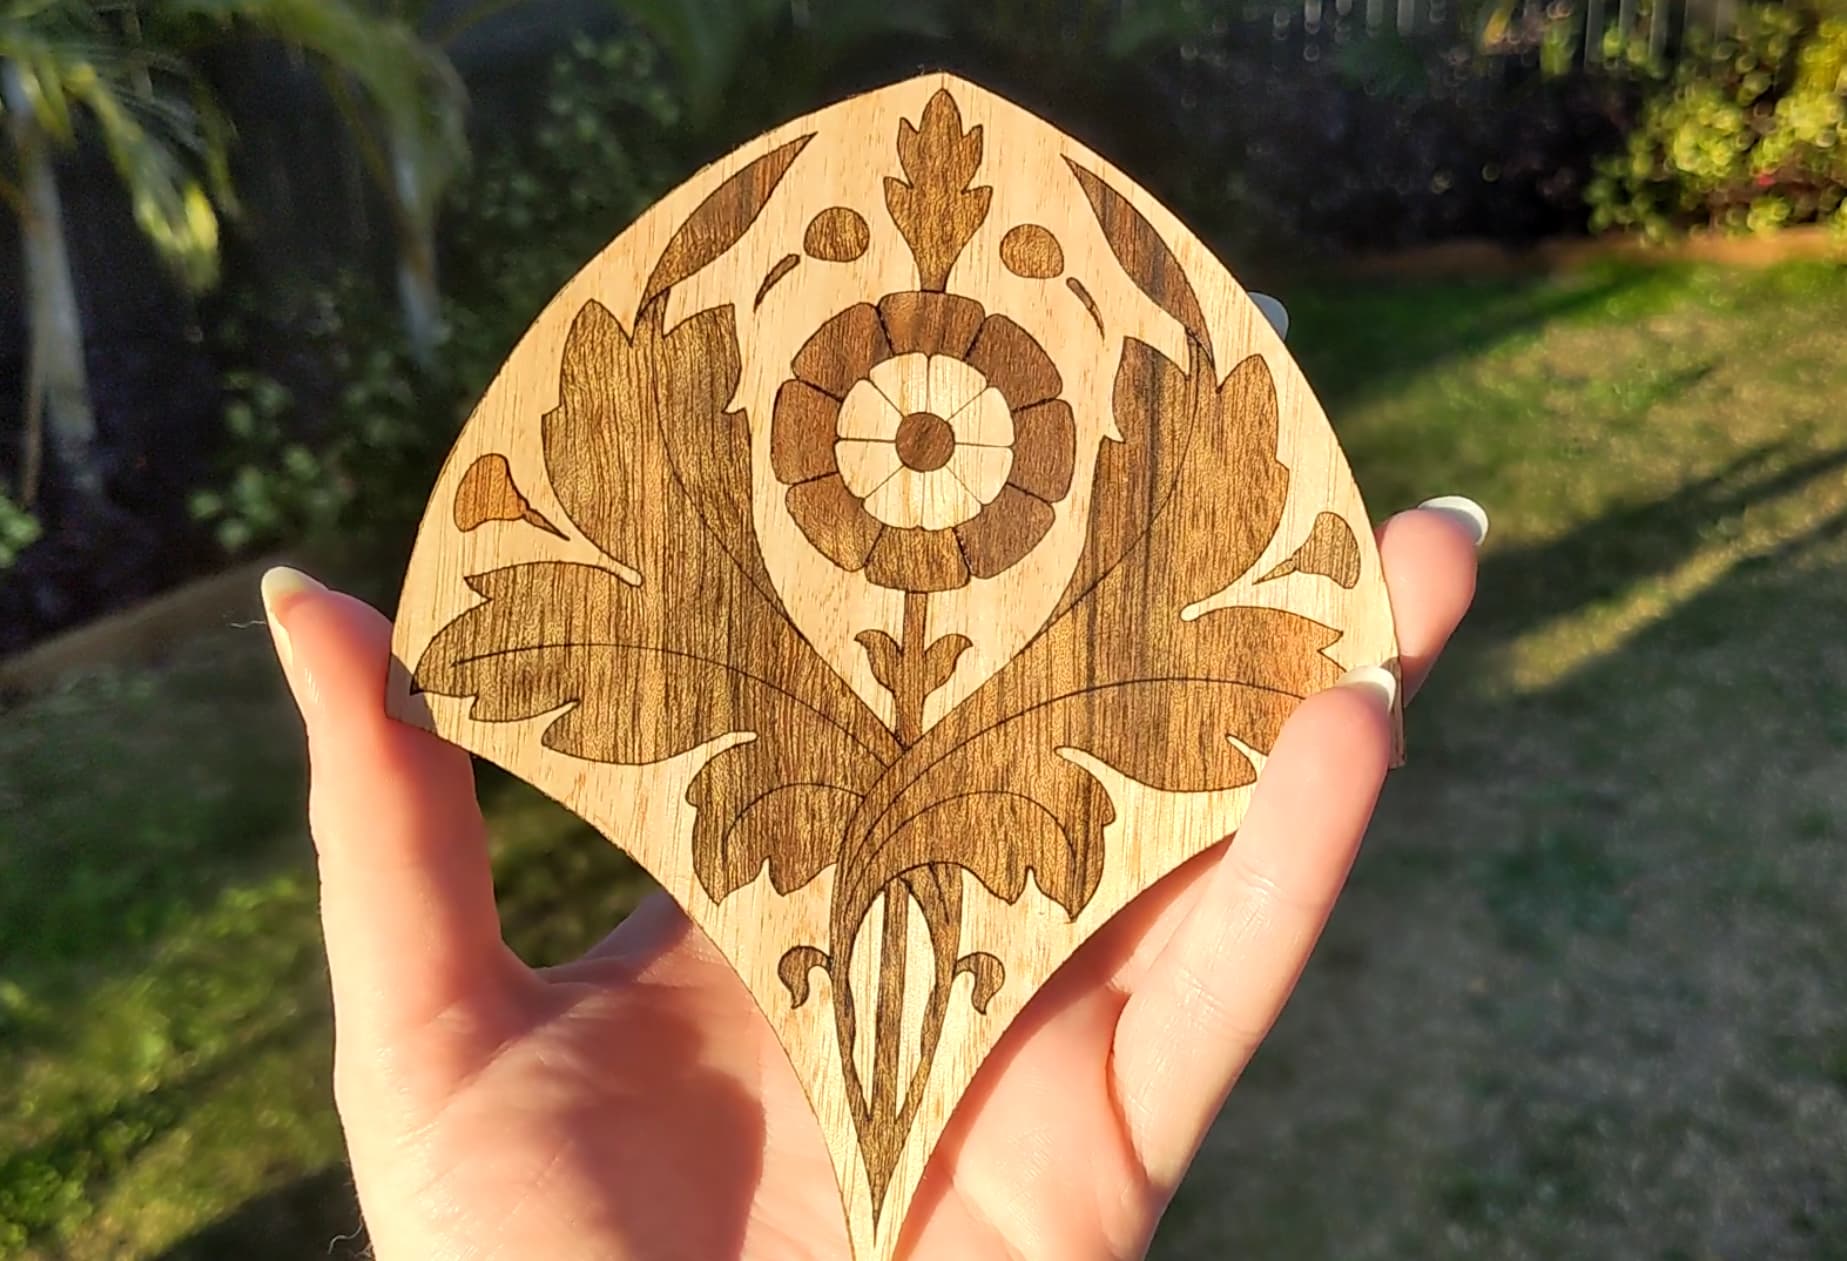 First time trying to do an inlay design by laser engraving the coaster and  then laser cutting the veneer. Not perfect, but given the 6 failed attempts  not in the picture, I'm